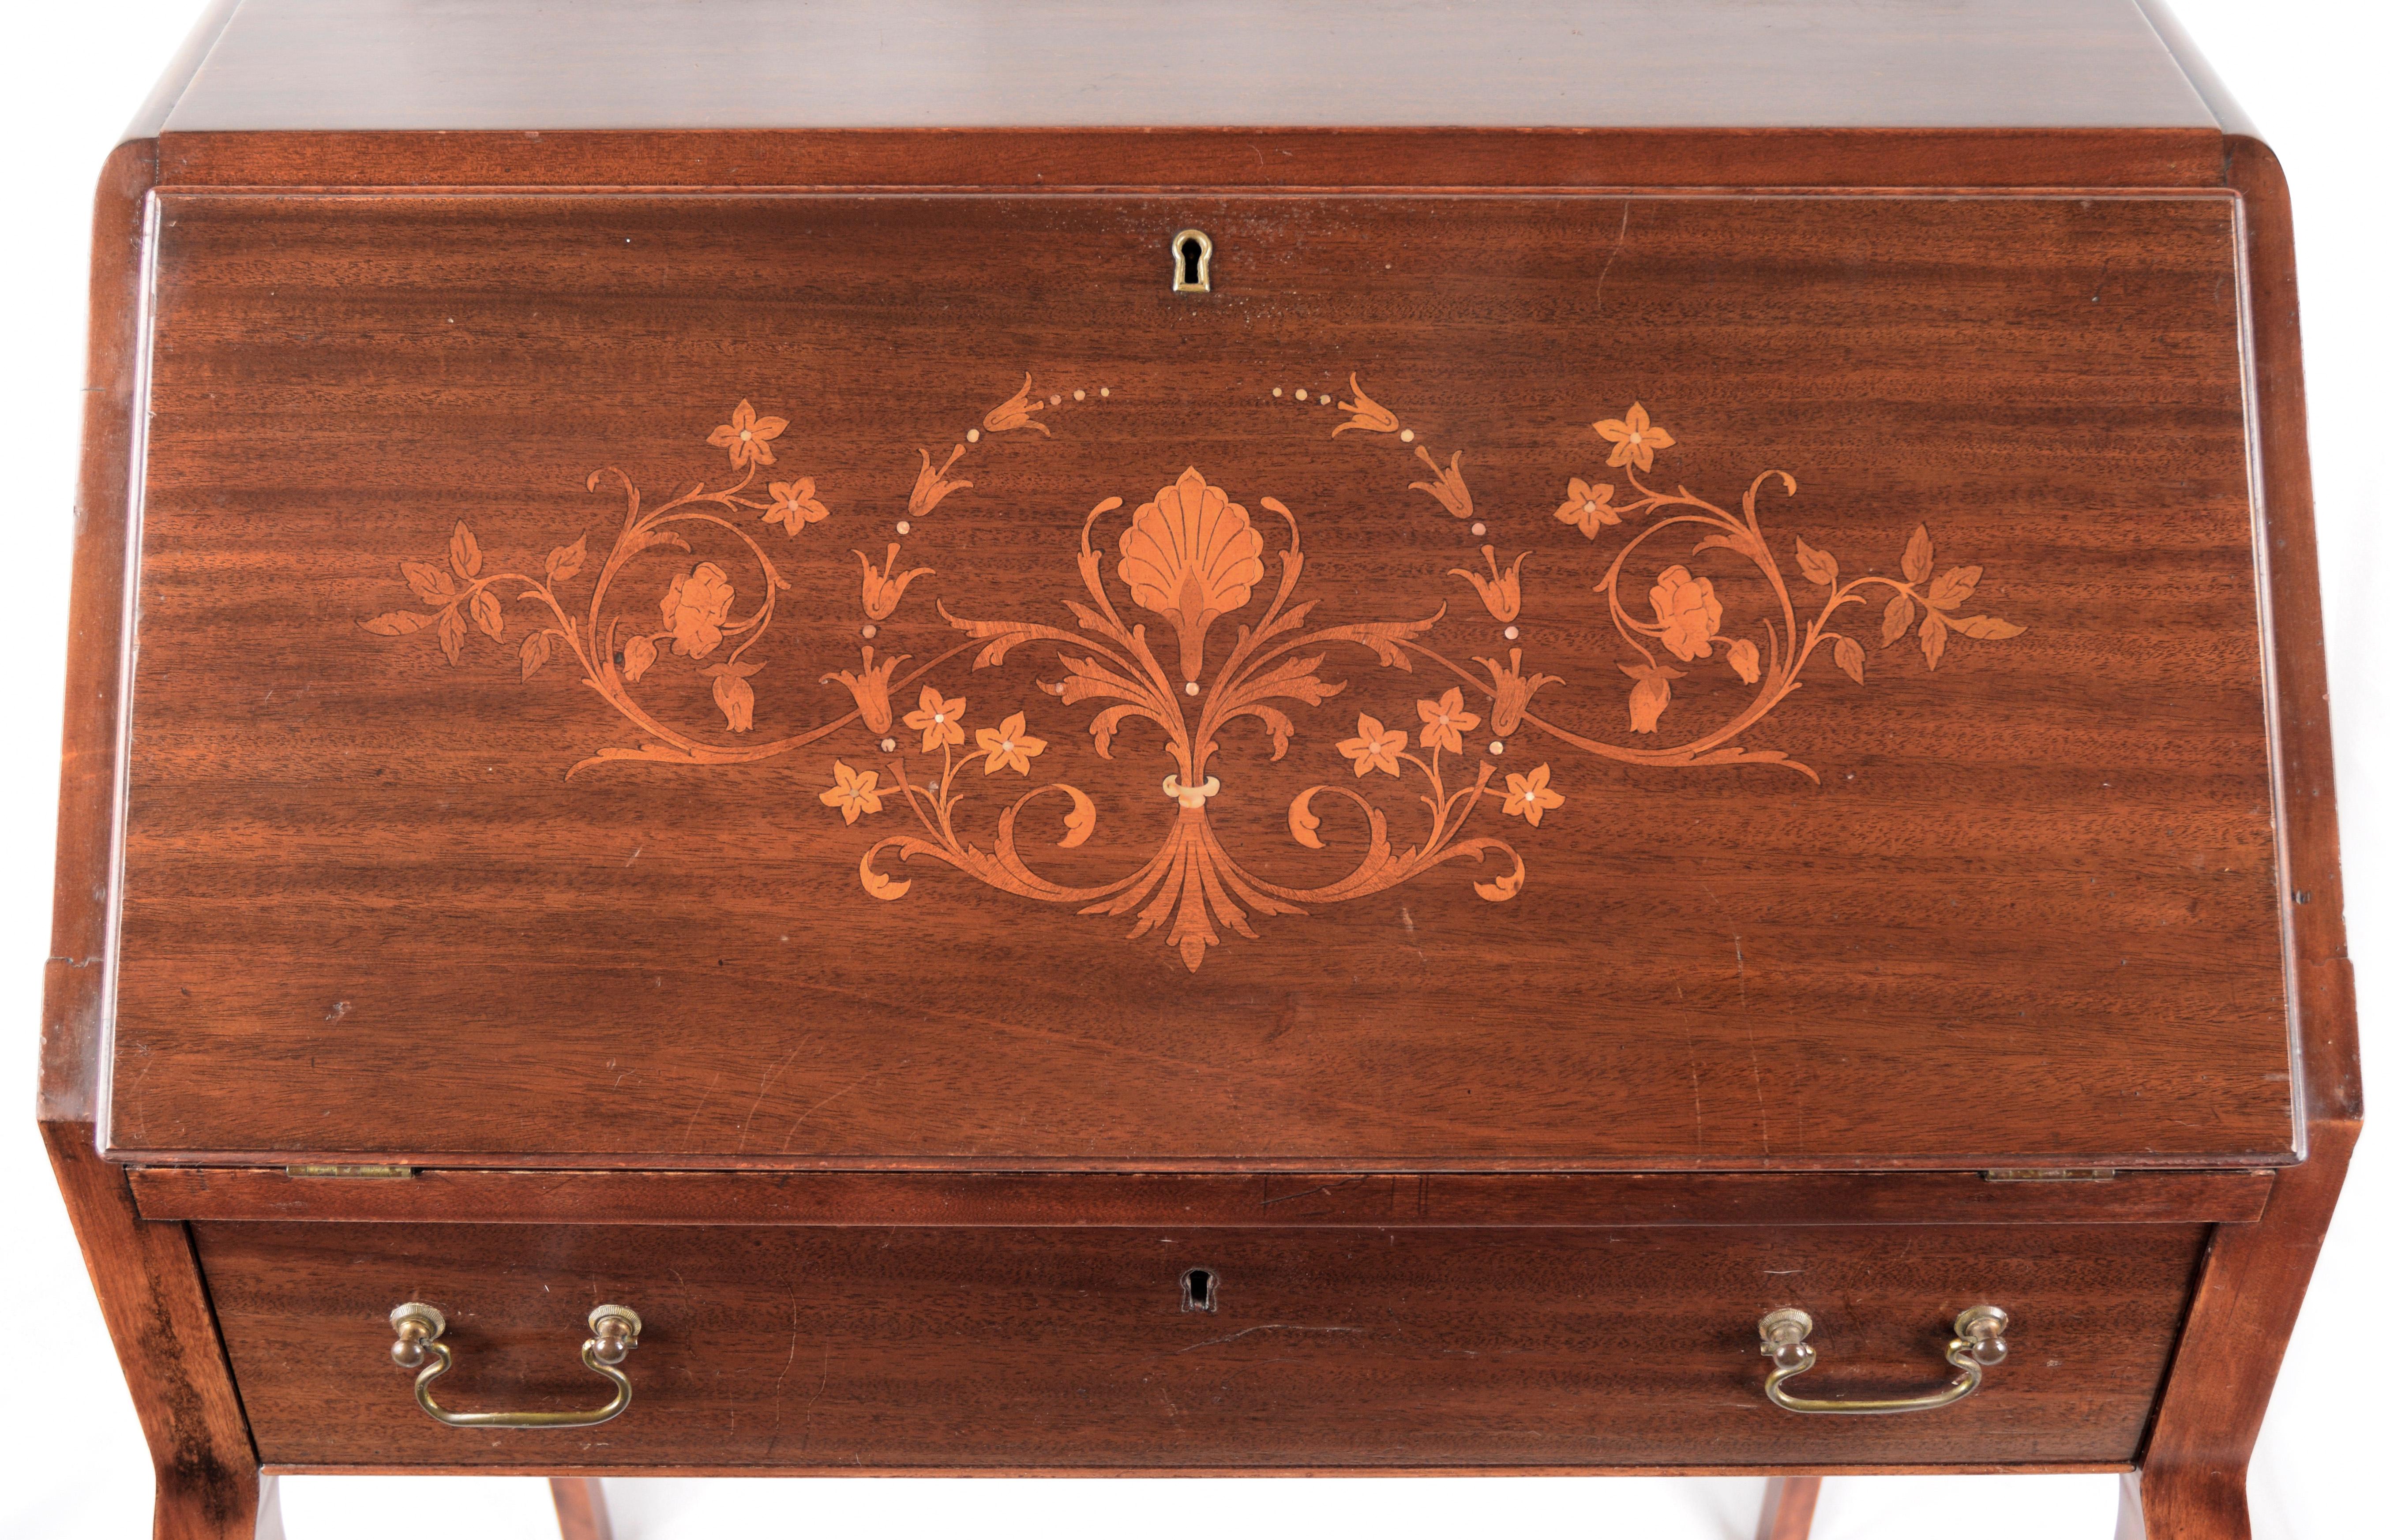 French Provincial Style Walnut Secretary Desk with Marquetry Inlays and Key. Original Finish.

